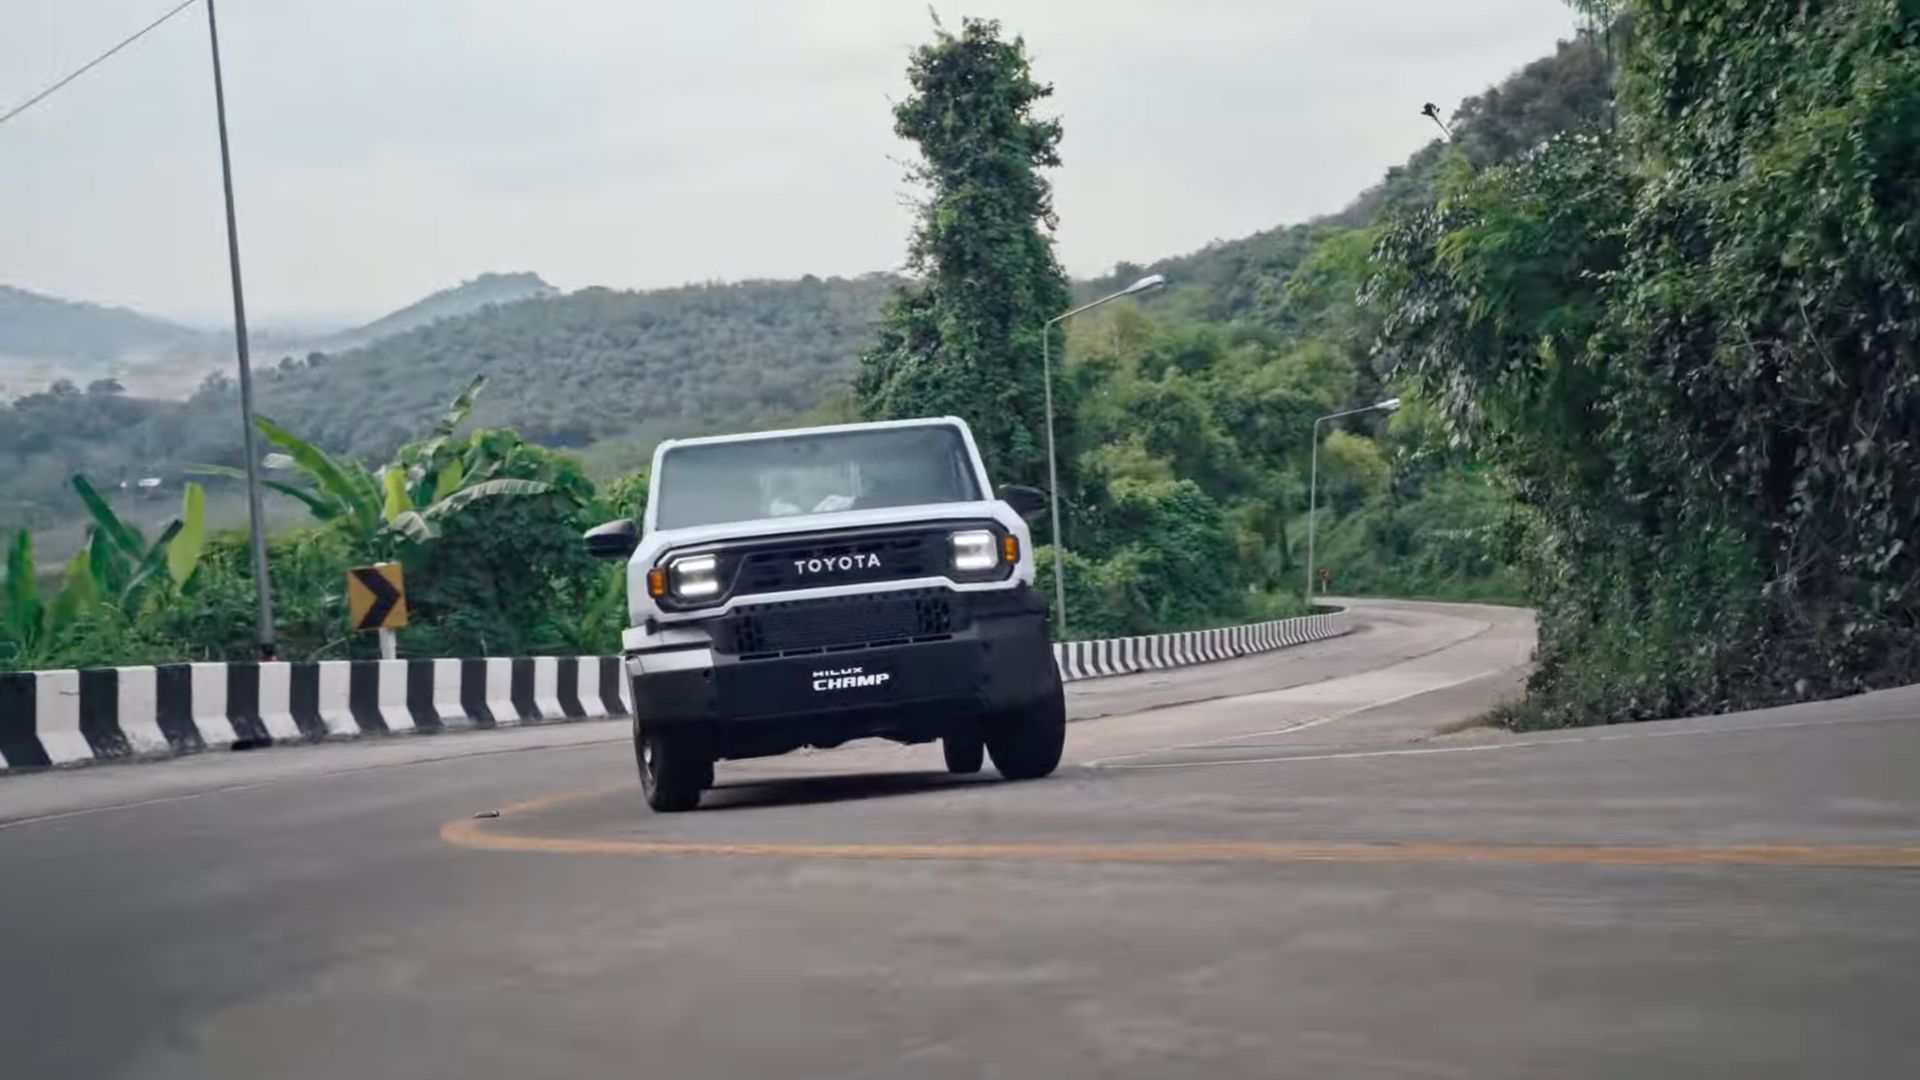 the hilux champ is the all-new toyota tamaraw we can expect here soon